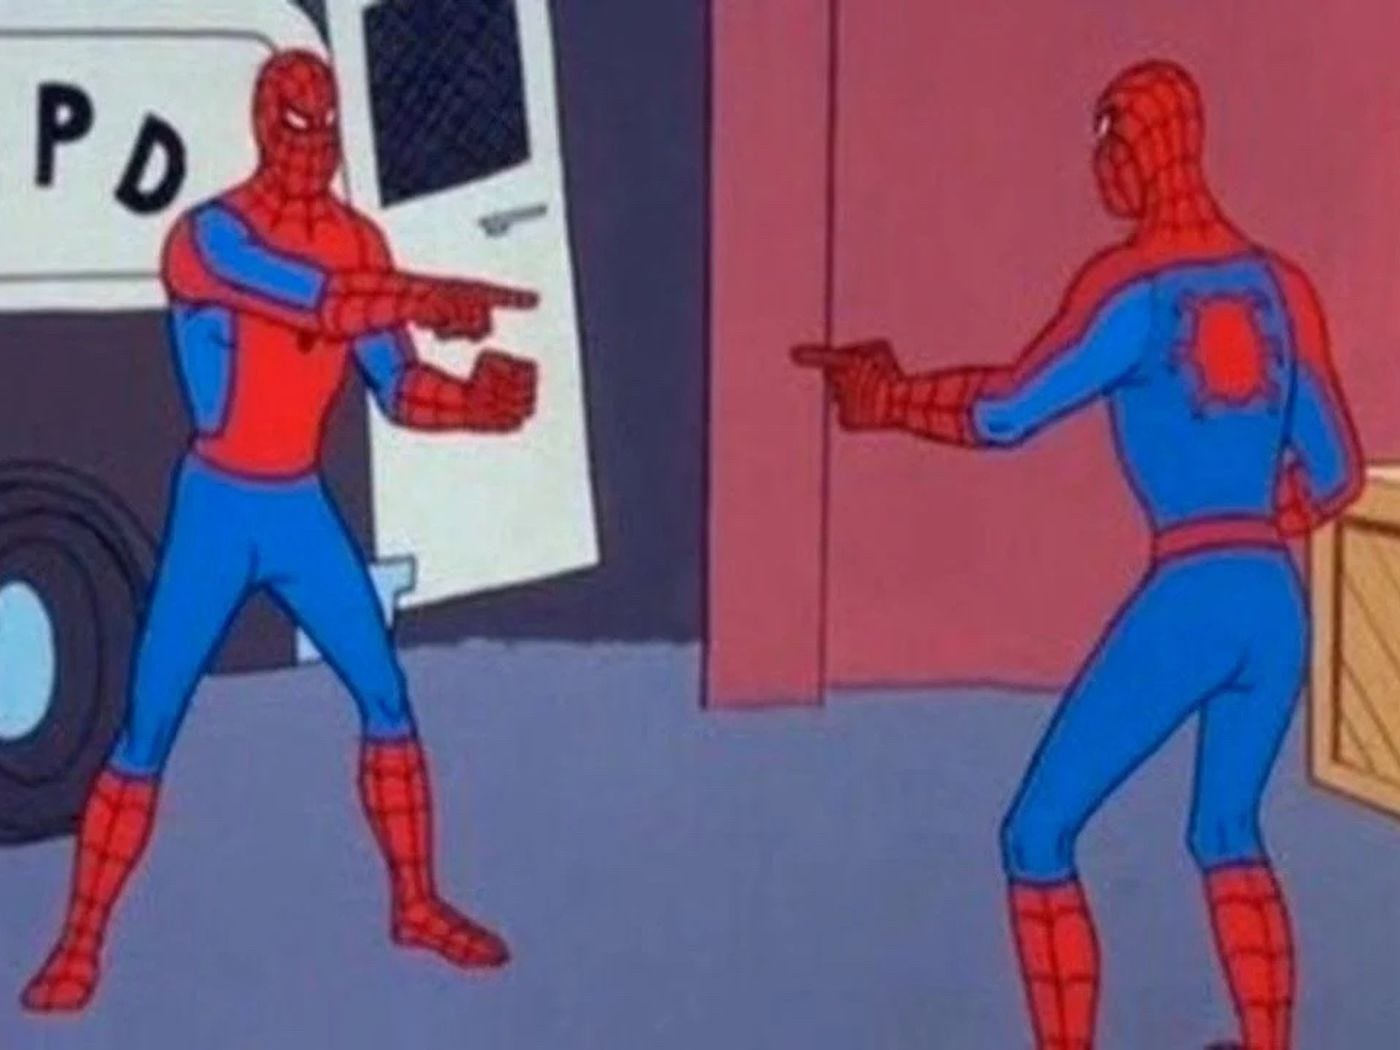 Spider-Man meme: drawing of two Spider-Men pointing at each other outside a police van